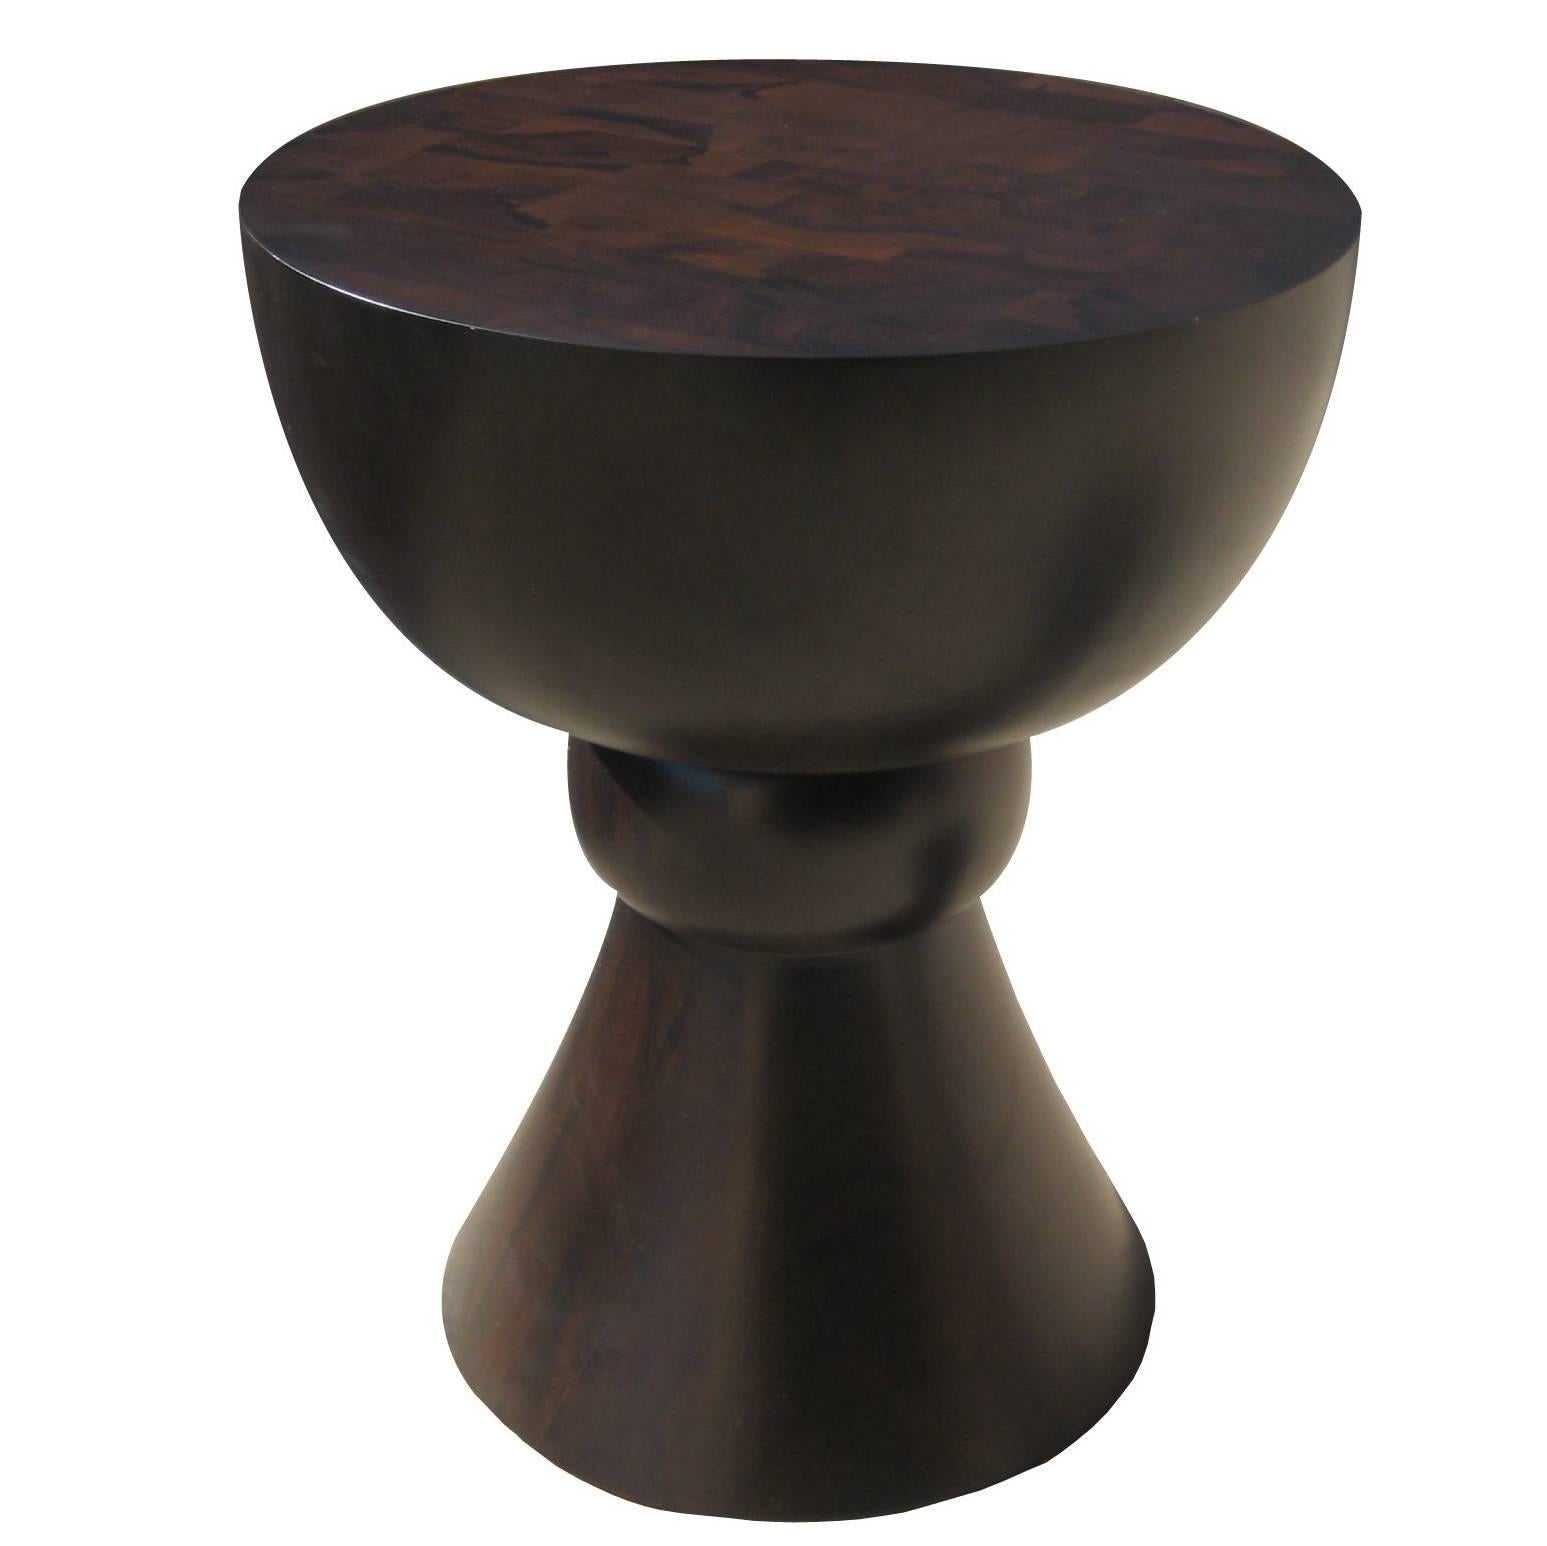 Turned Sculptural Walnut Burl Occasional Side Table from Costantini, Caliz